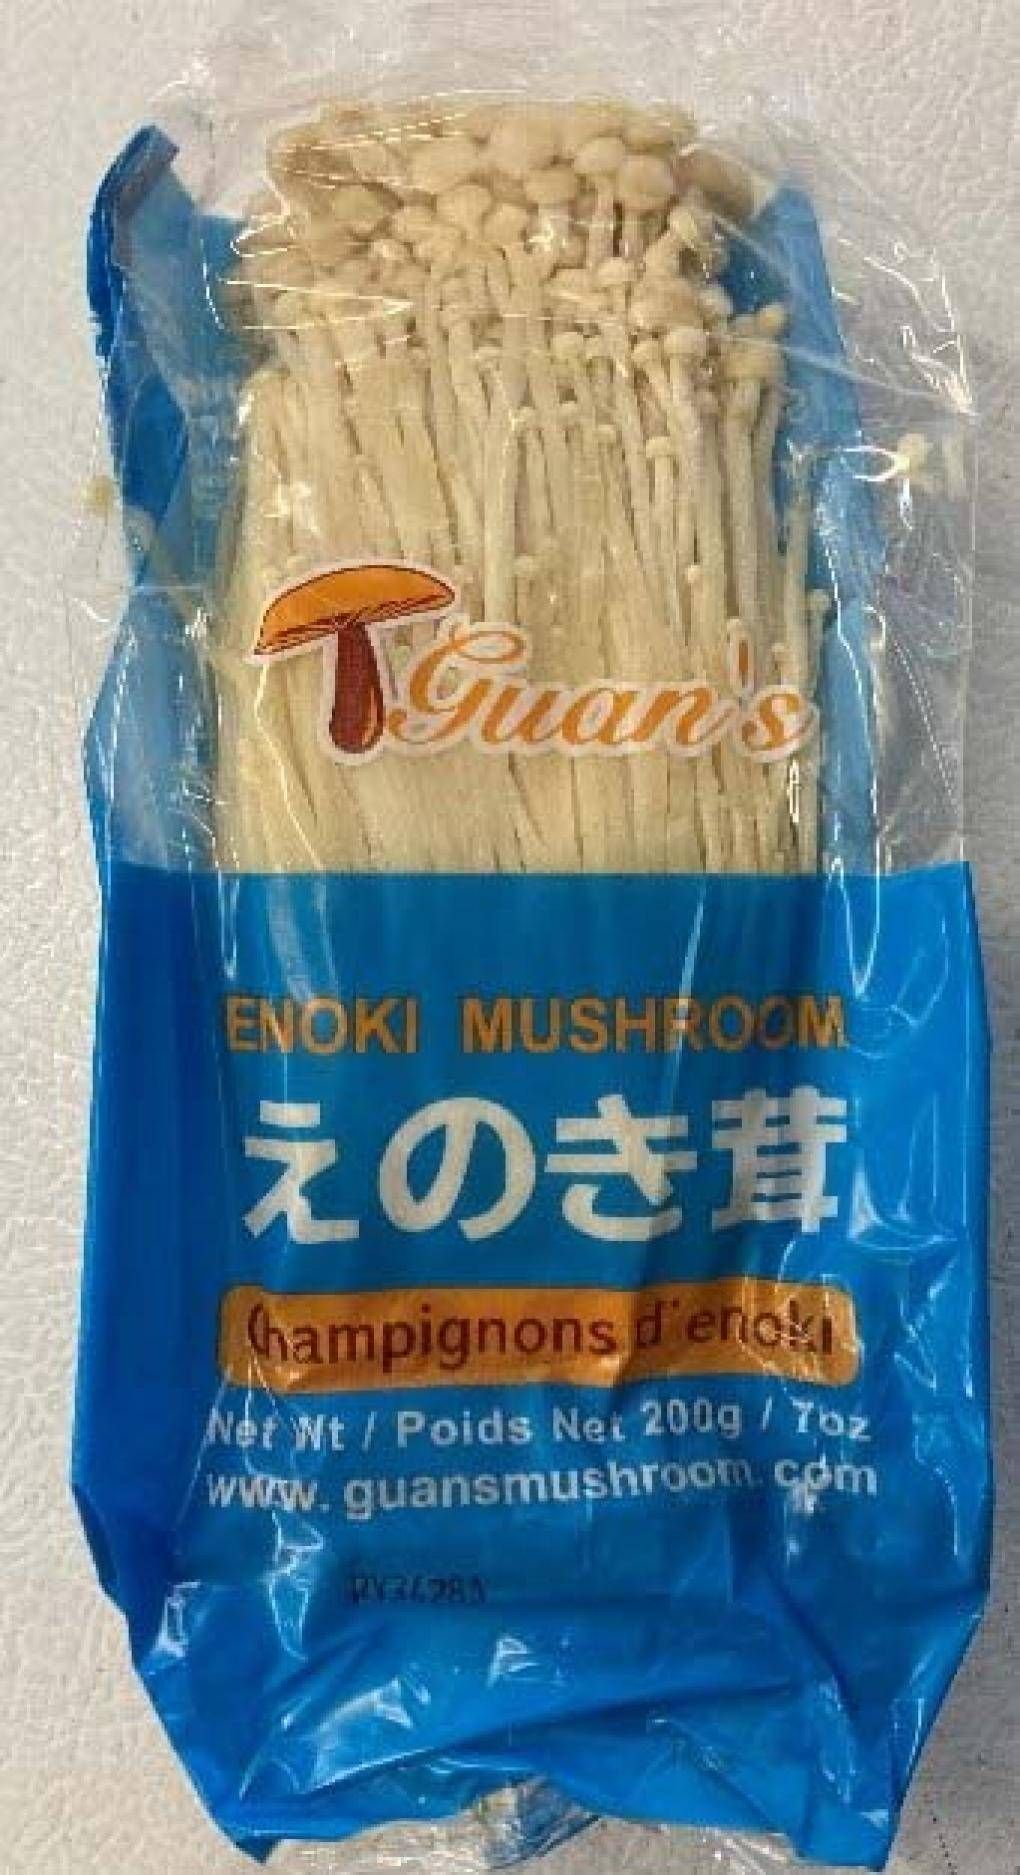 Cases of Enoki mushroom are being recalled due to a potential listeria contamination.